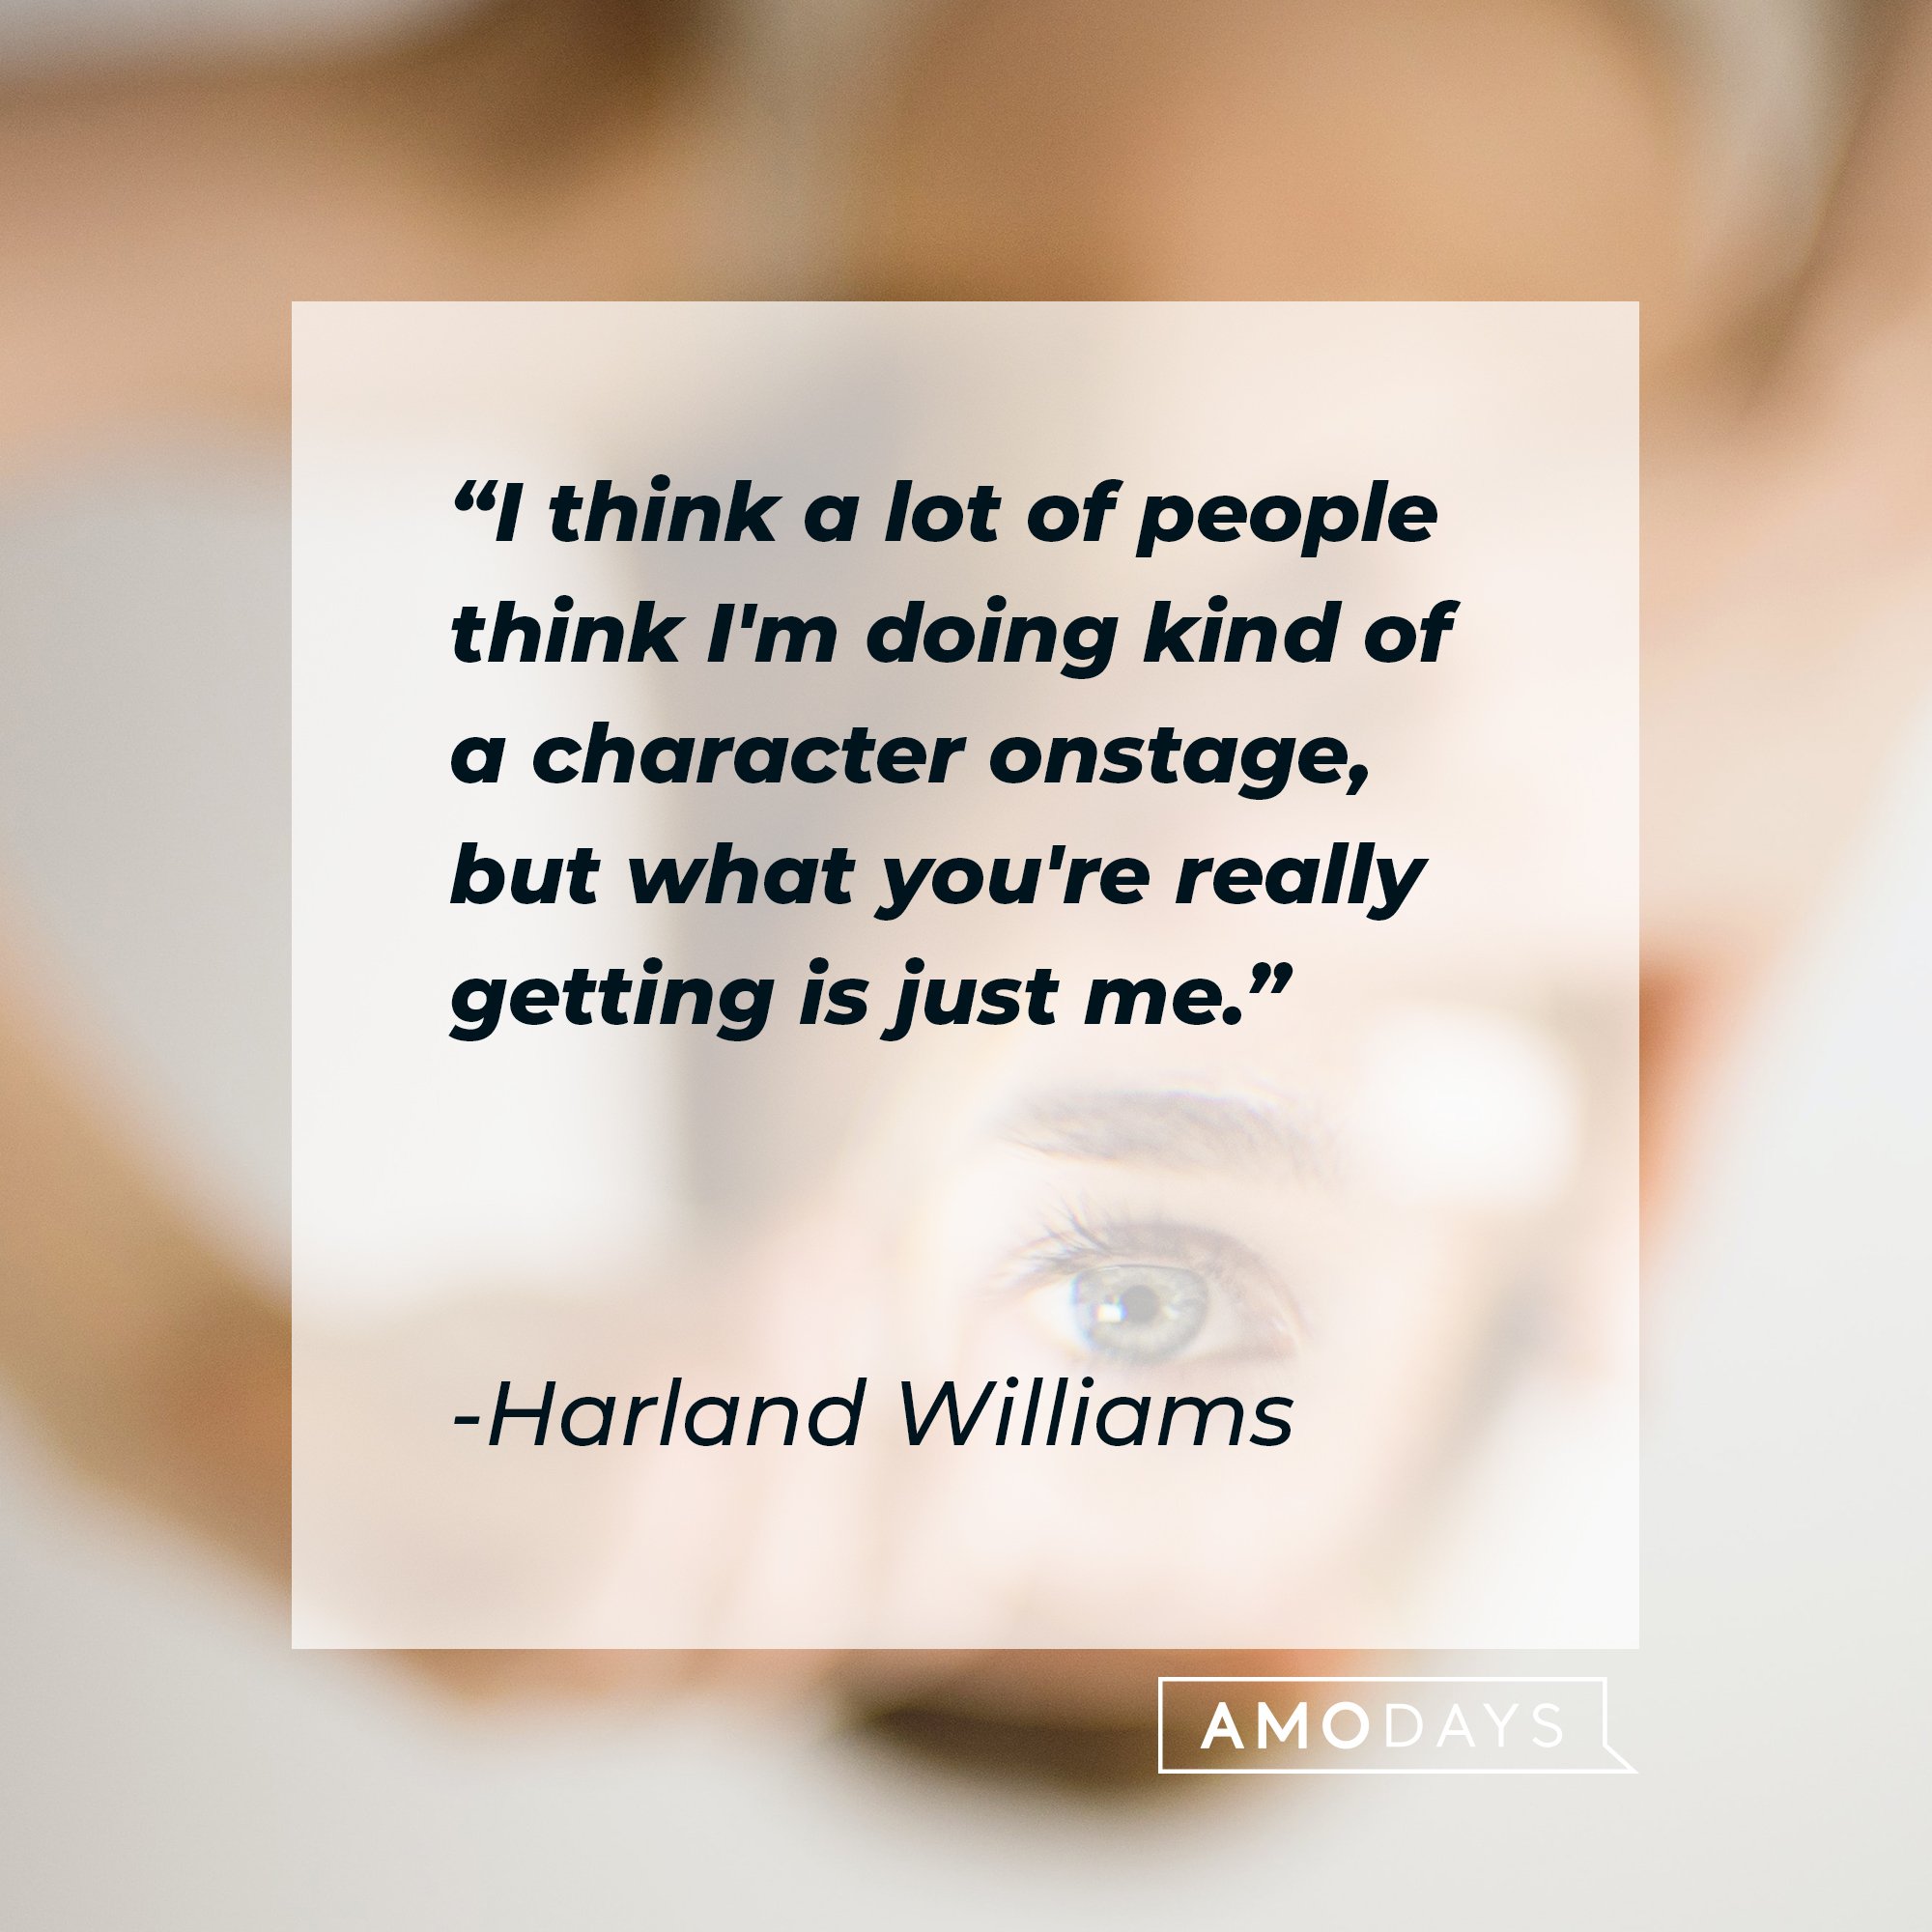 Harland Williams’ "I think a lot of people think I'm doing kind of a character onstage, but what you're really getting is just me." | Image: AmoDays 